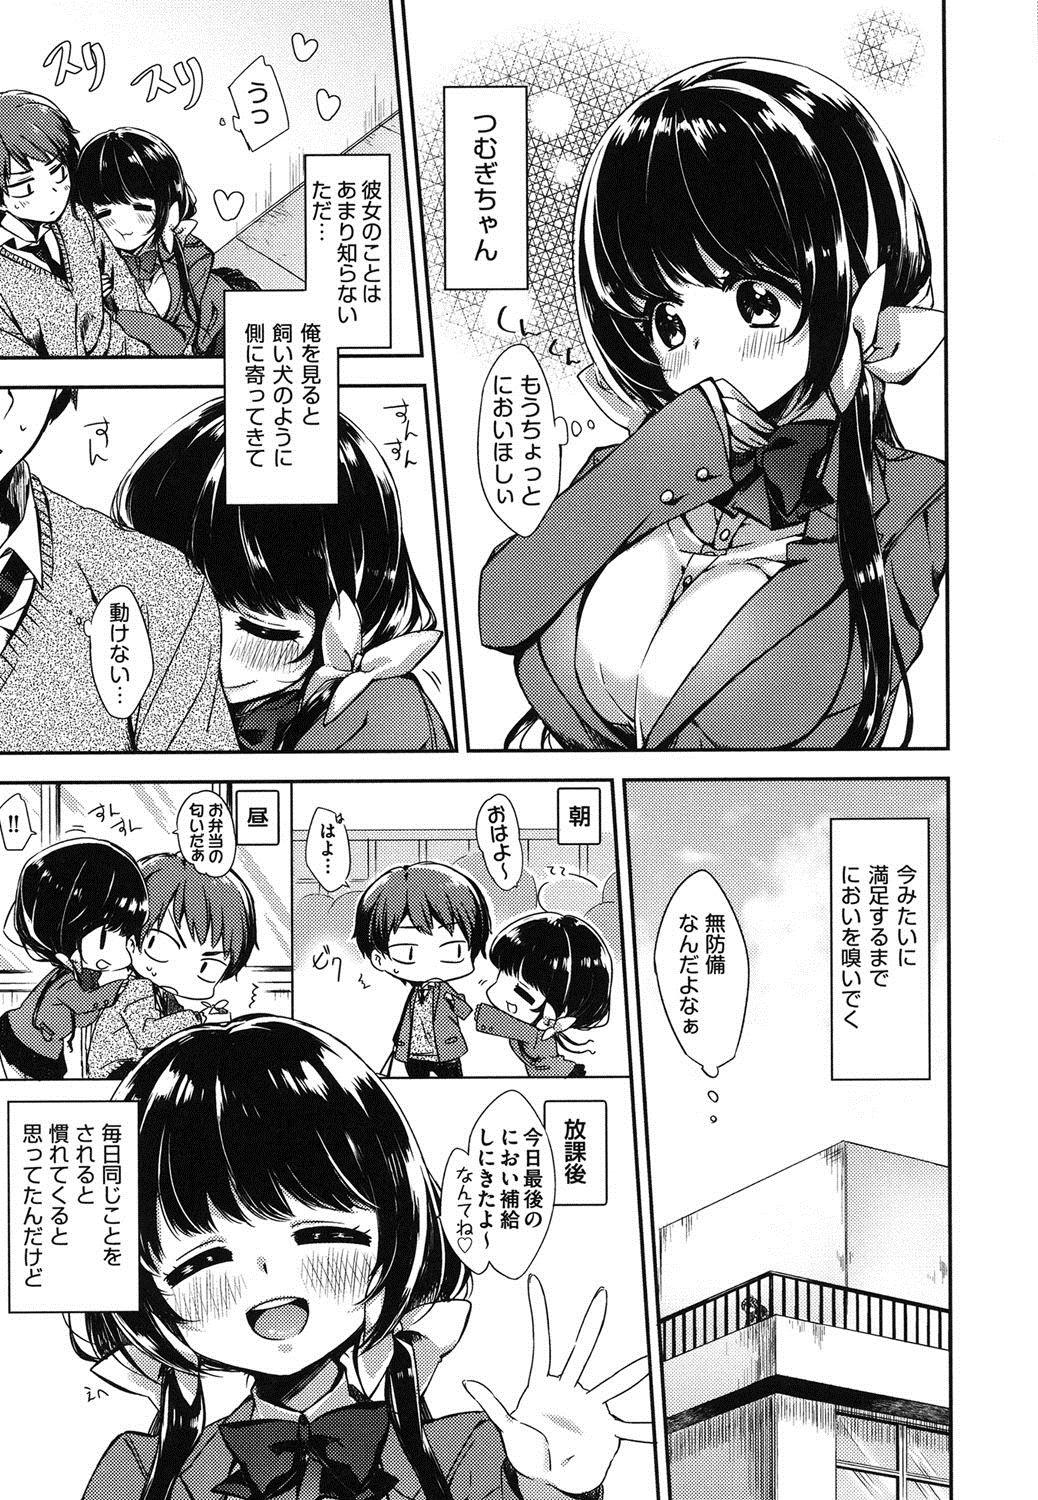 Oppai March 191